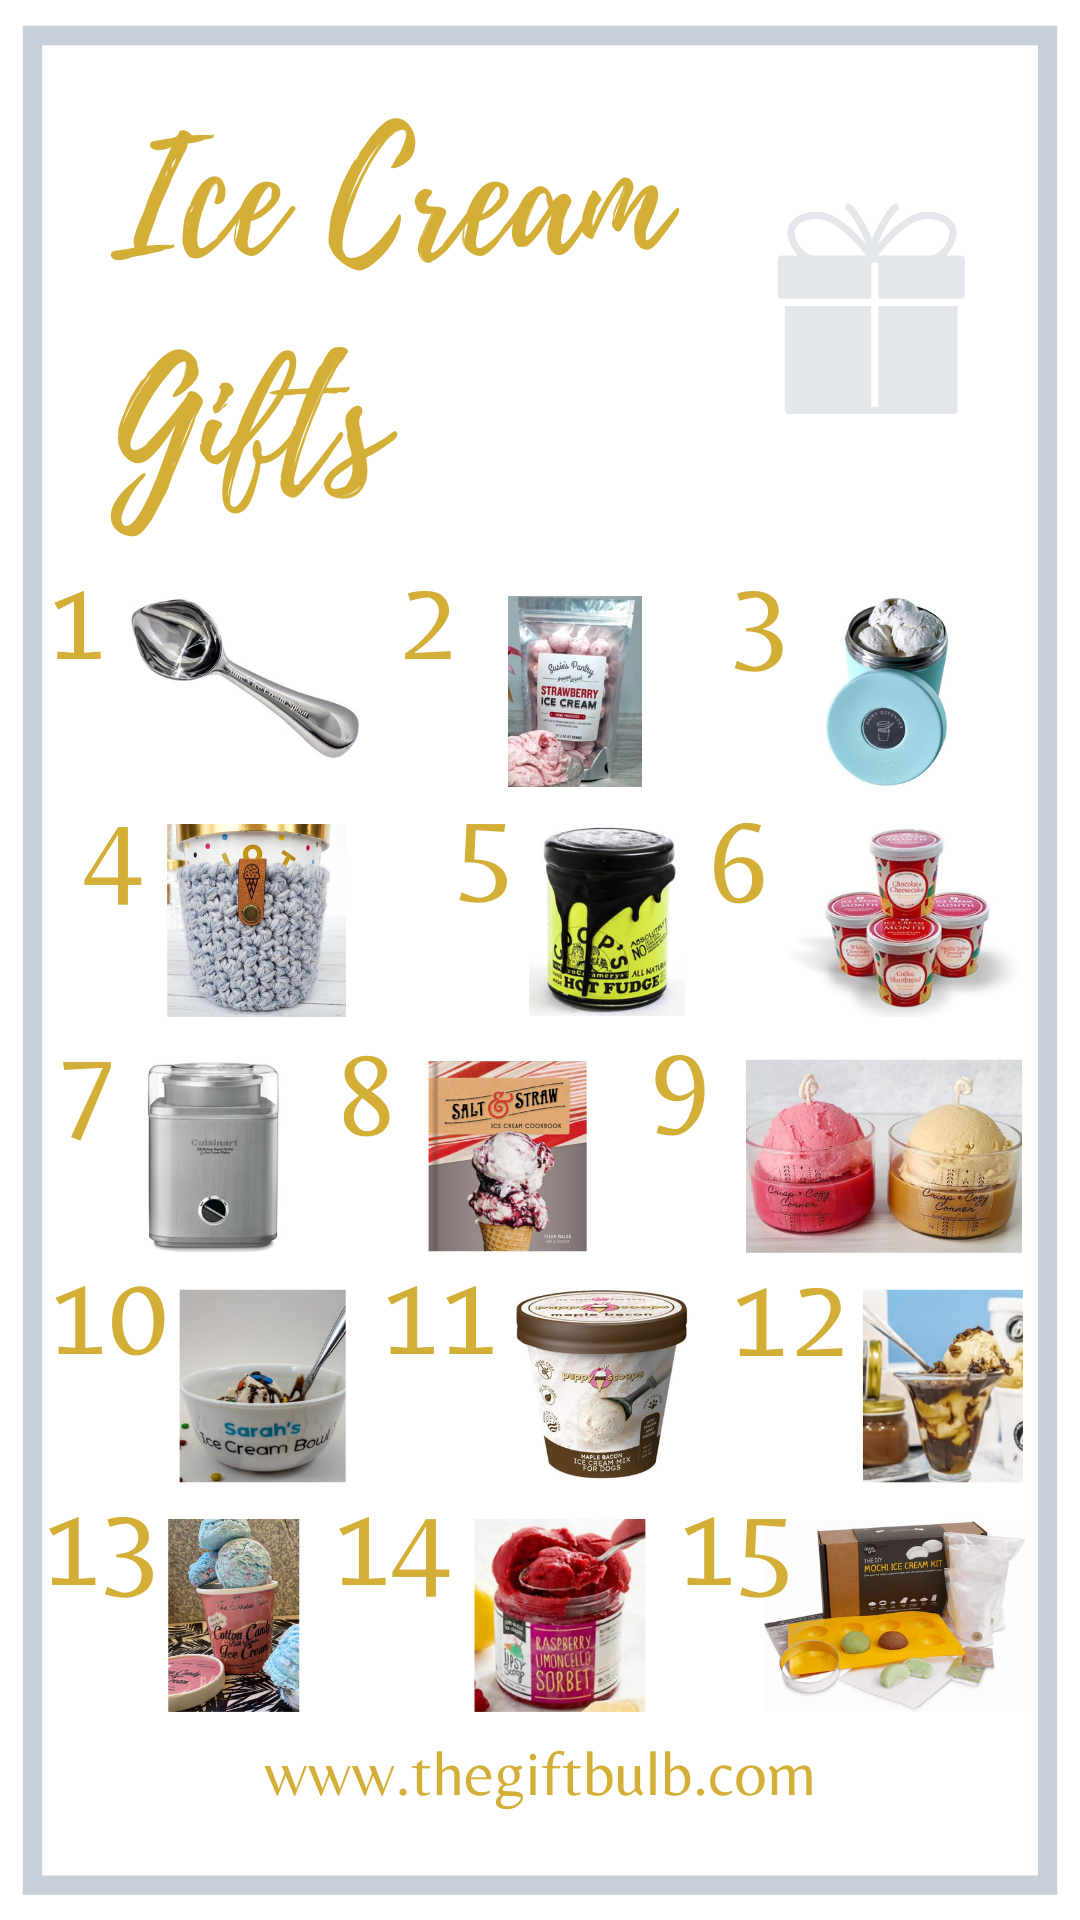 gifts for ice cream lovers